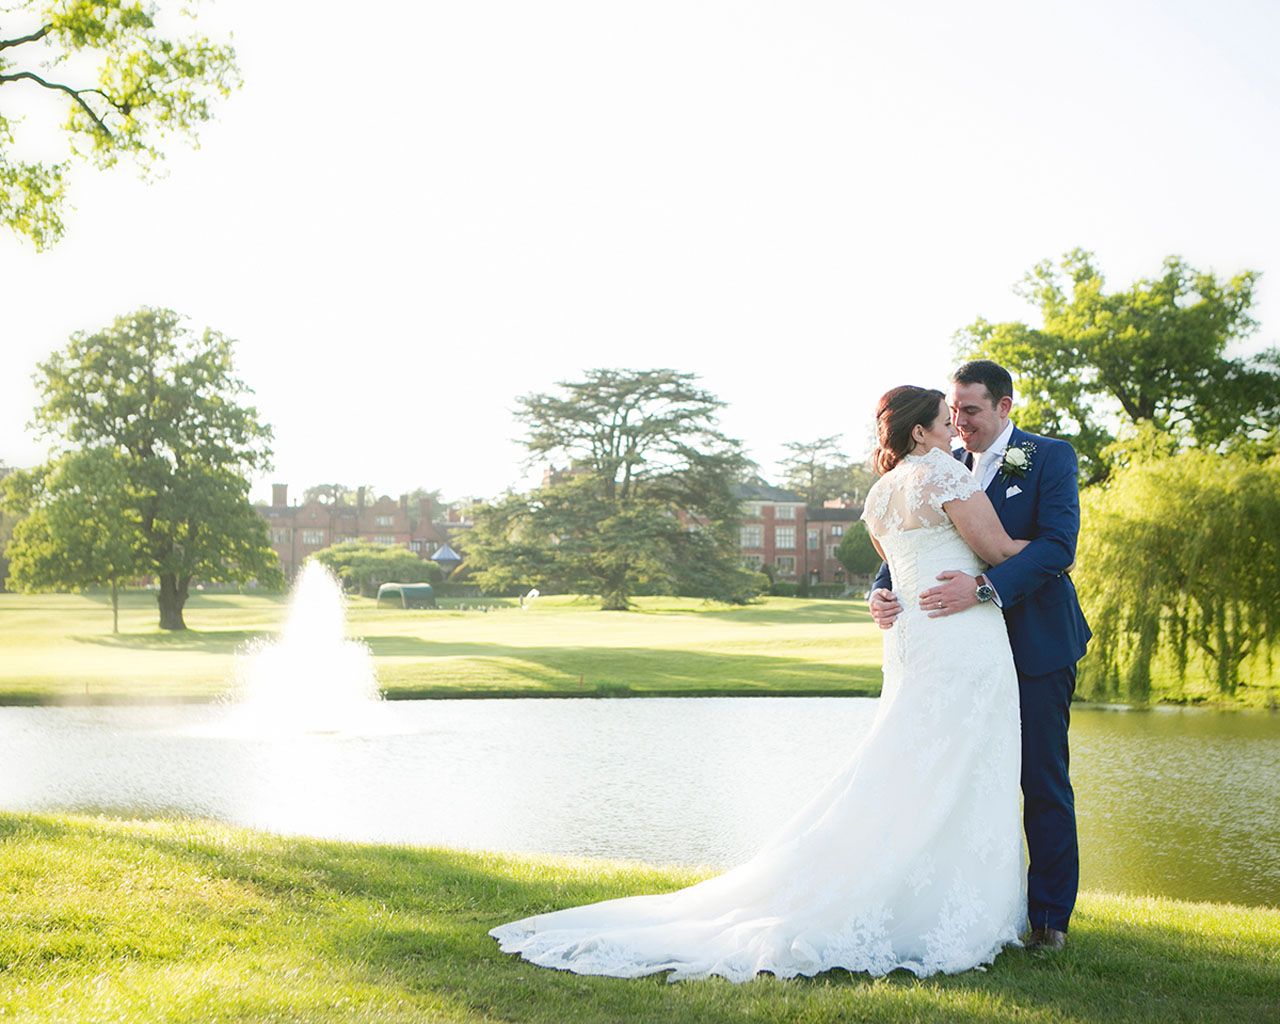 Anne Marie and Andrew in front of the lake at Hanbury Manor - Photography by Katrina Matthews Photography - Videography by Veiled Productions - Hanbury Manor Wedding Videographer